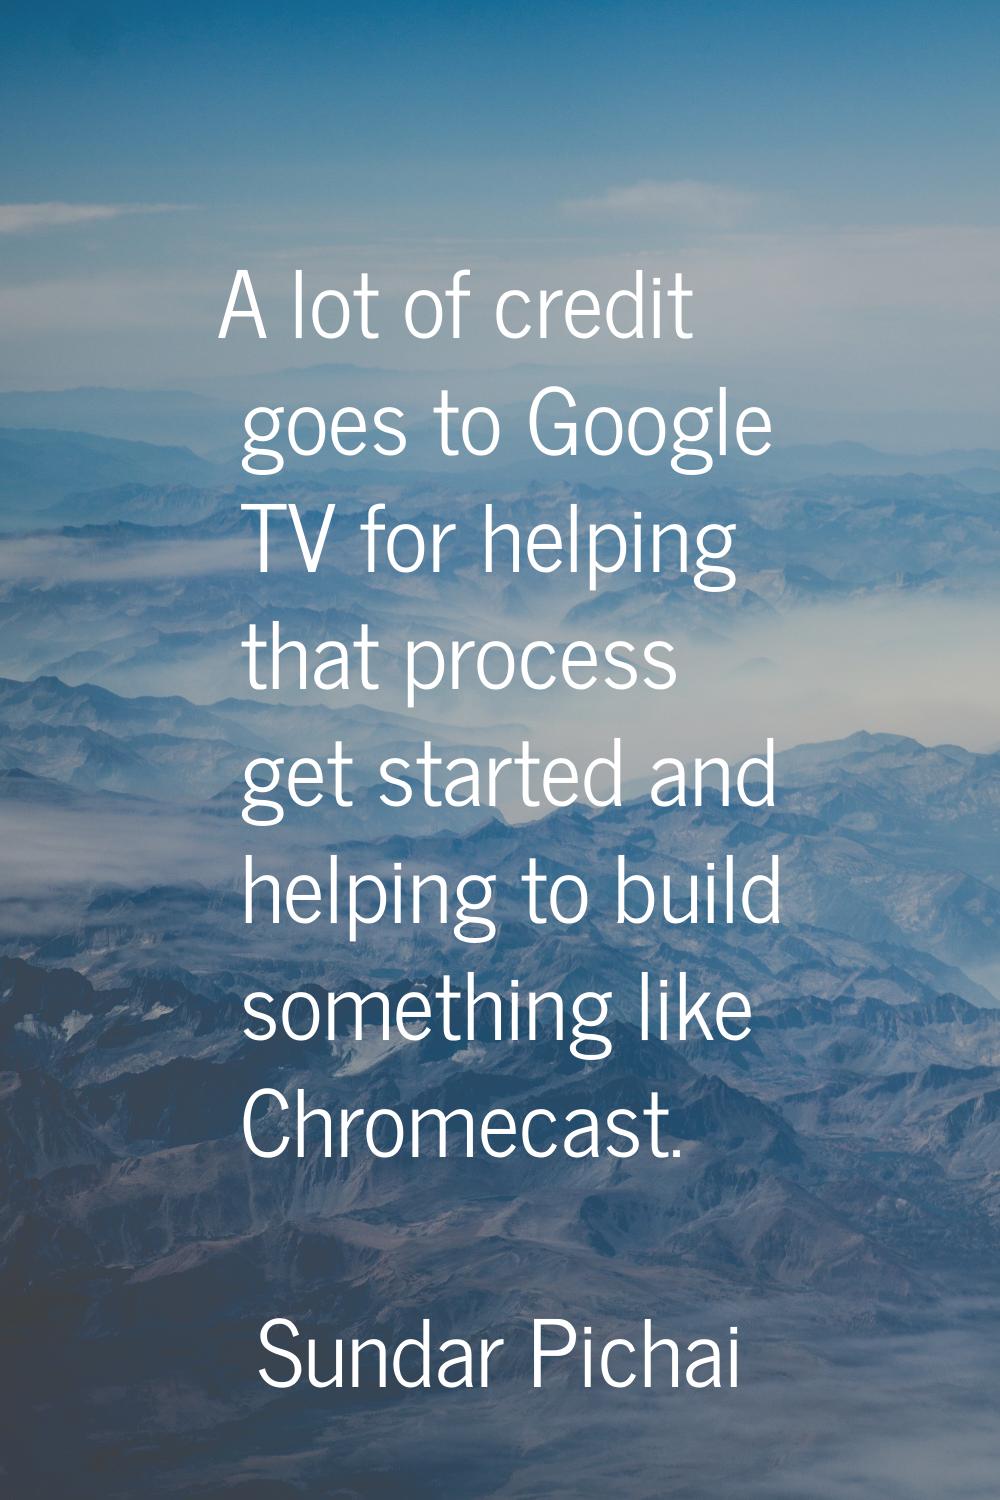 A lot of credit goes to Google TV for helping that process get started and helping to build somethi